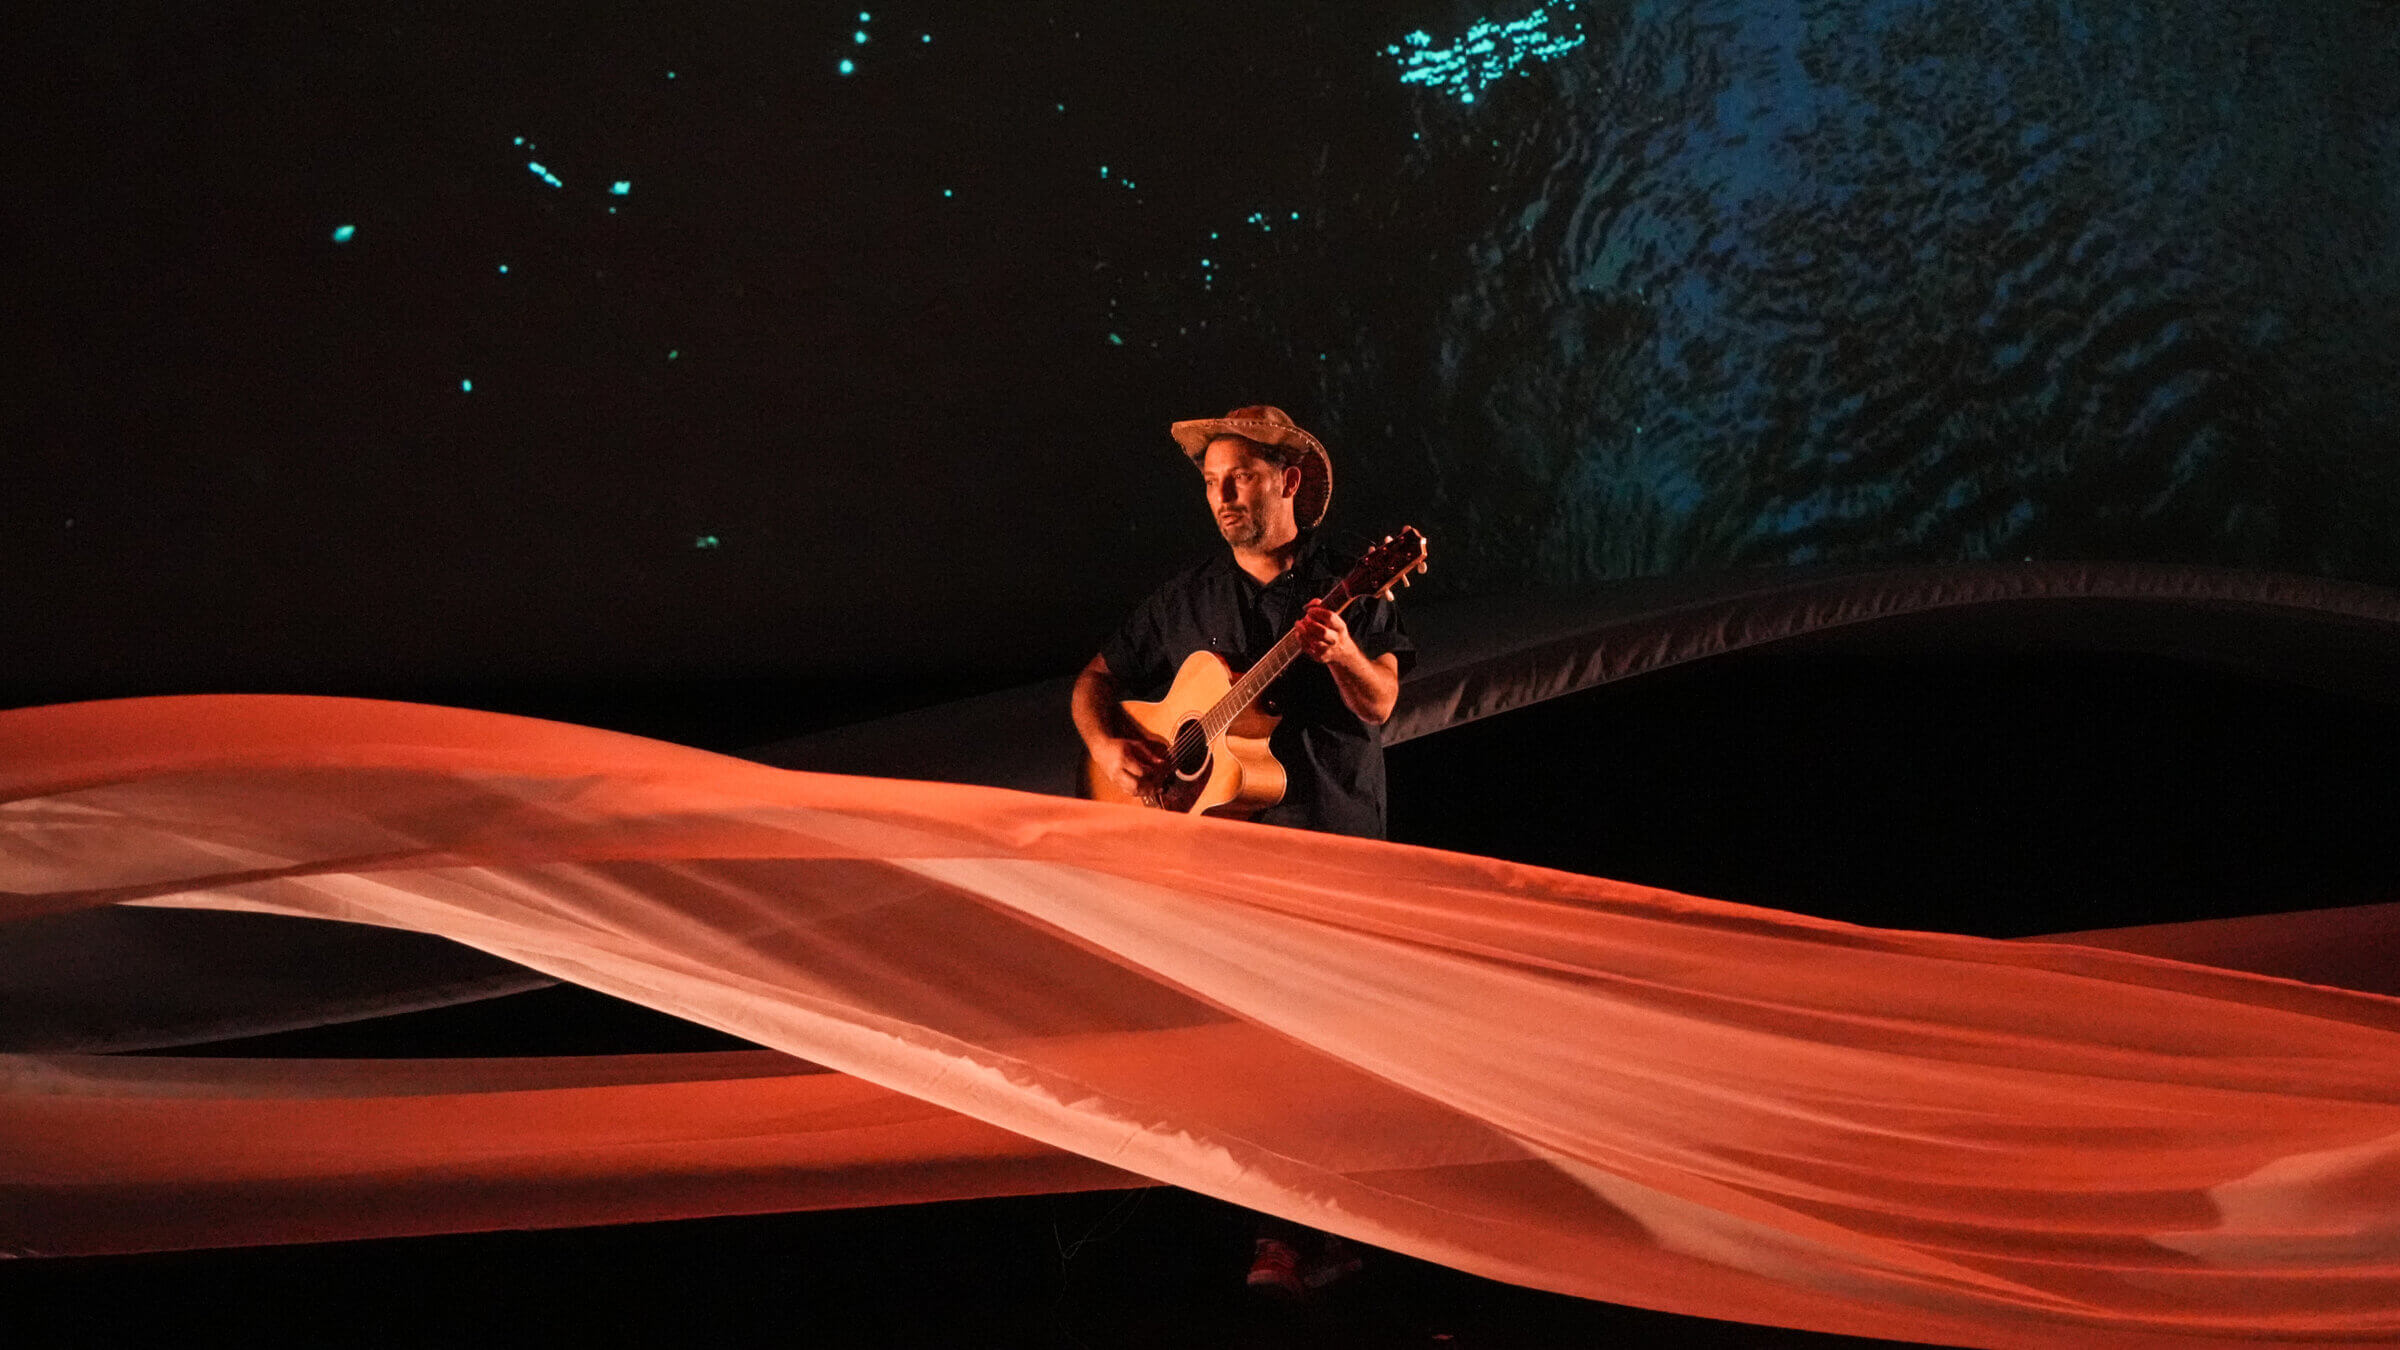 Josh Fox performs in <i>The Edge of Nature</i>.